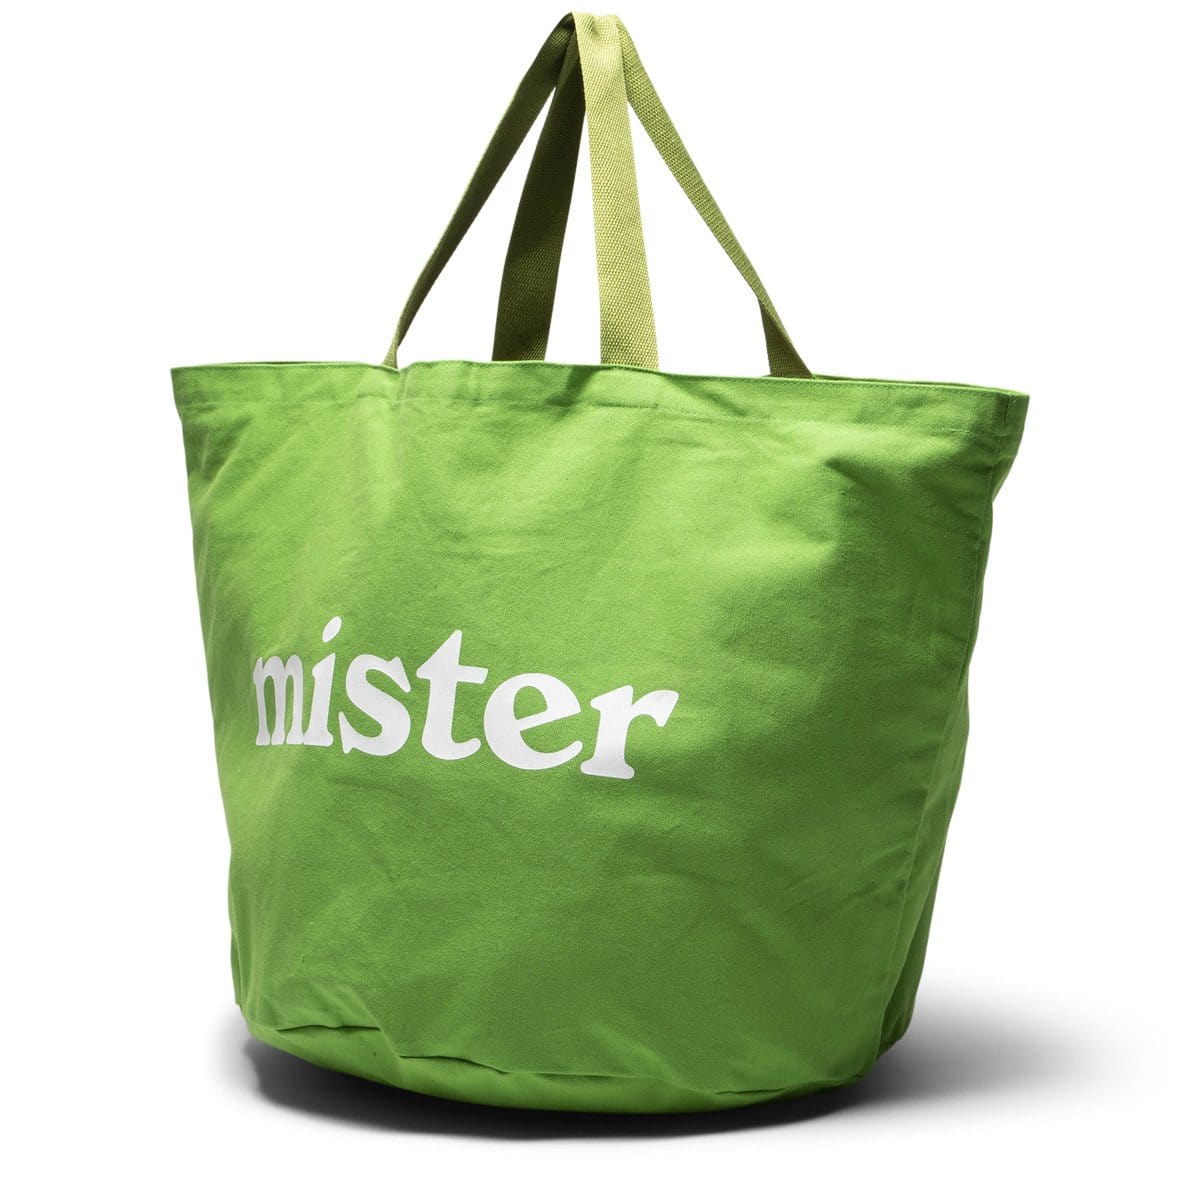 Mister Green Bags & Accessories GREEN / 20 IN. DIAMETER ROUND TOTE / GROW POT